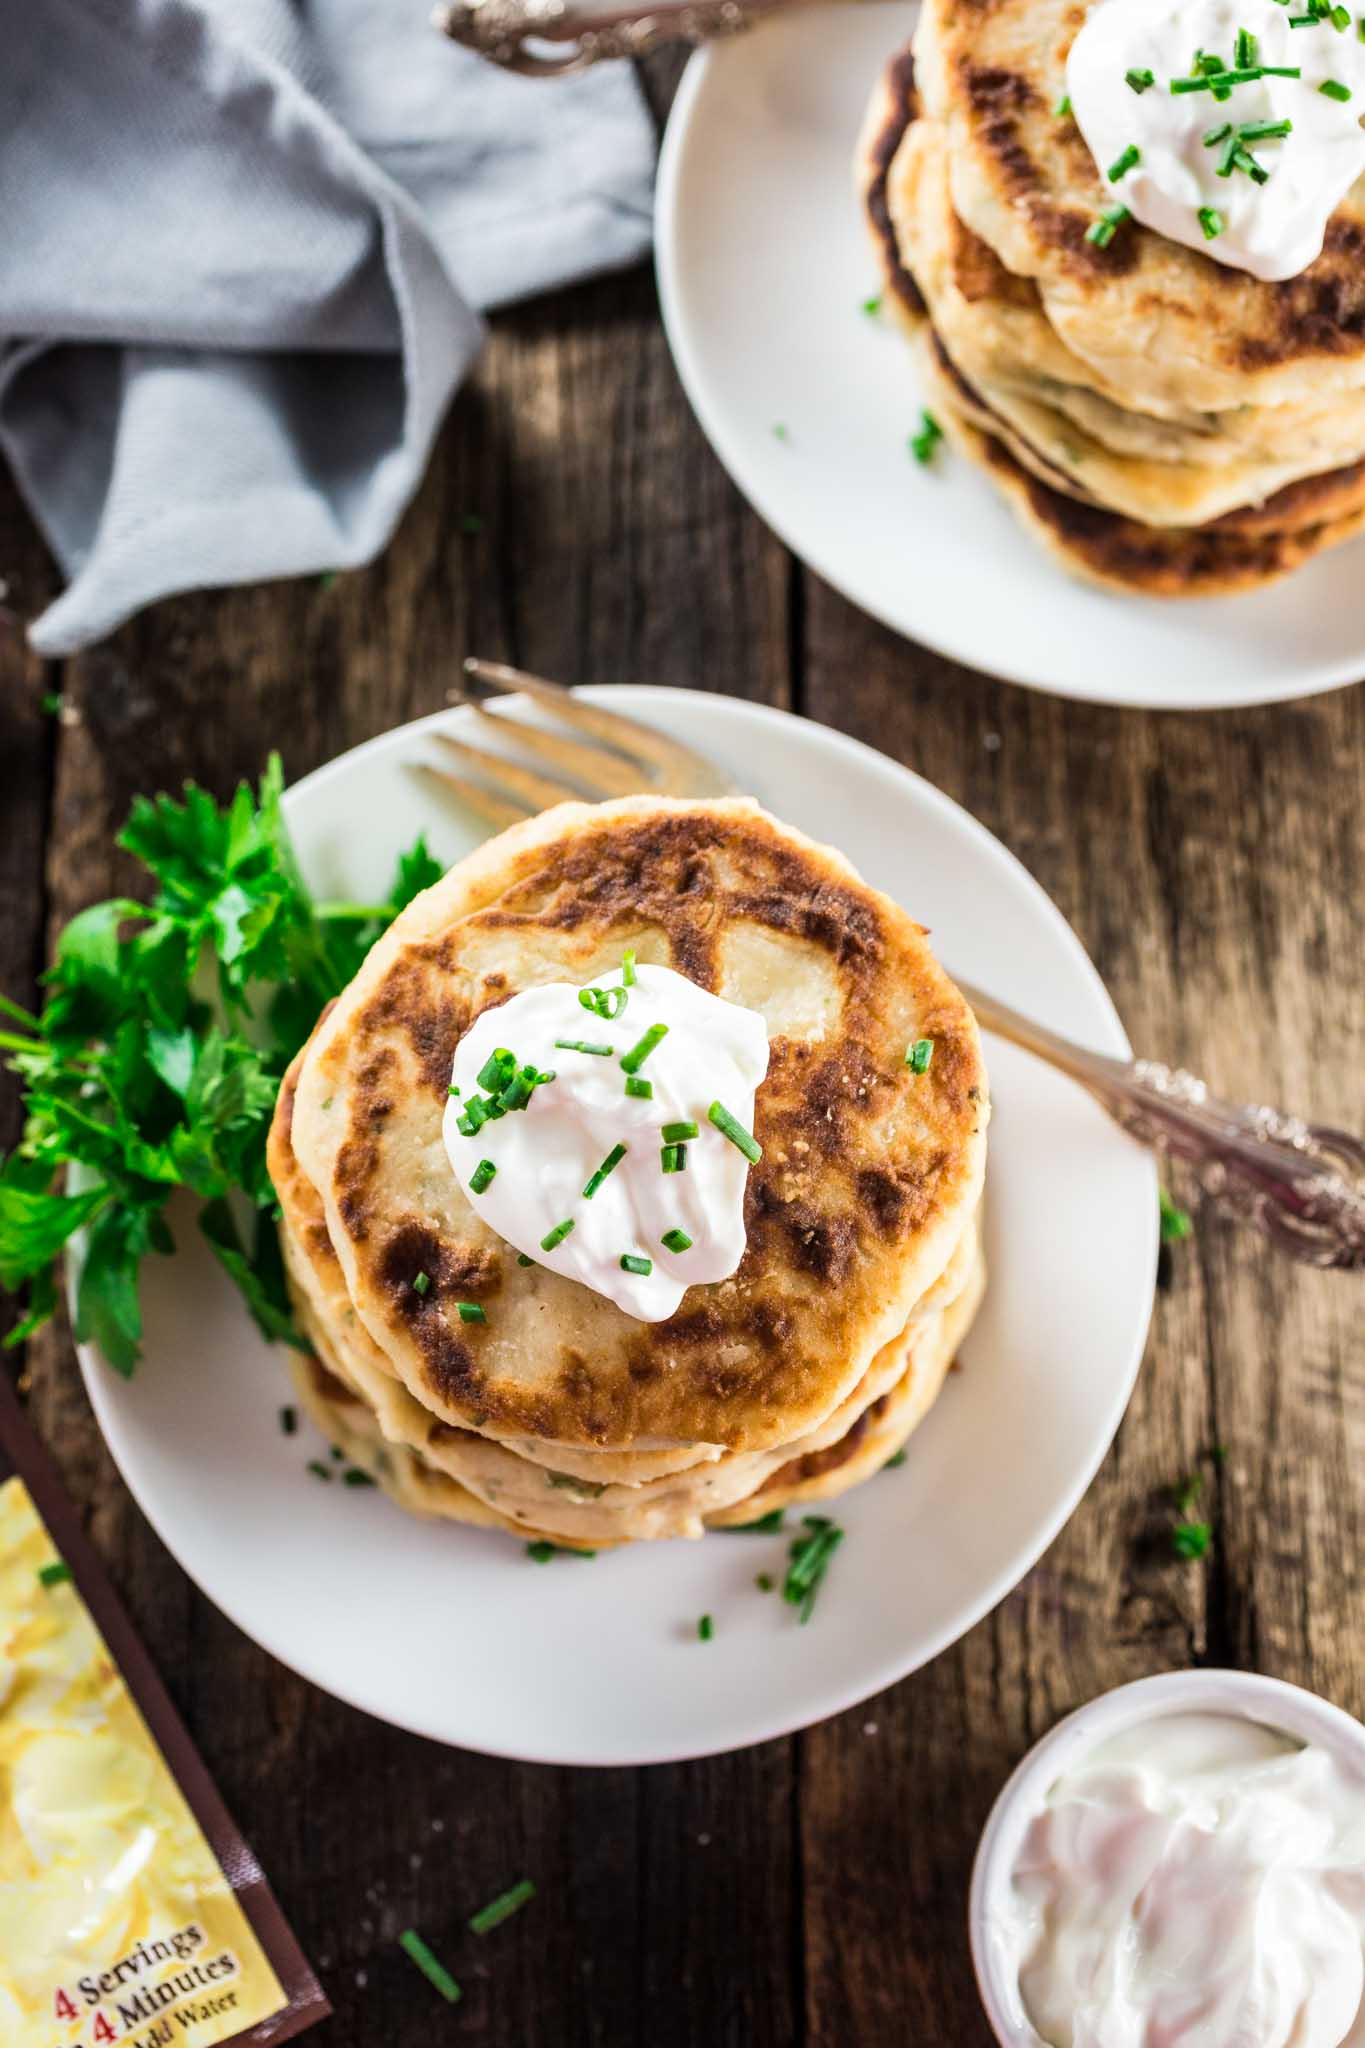 Mashed Potato Pancakes | www.oliviascuisine.com | Crisp and tender buttery Mashed Potato Pancakes are the perfect start for your Thanksgiving holiday! Made with just a few basic ingredients and ready in less than 20 minutes. Because "delicious yet easy" is my holiday motto!